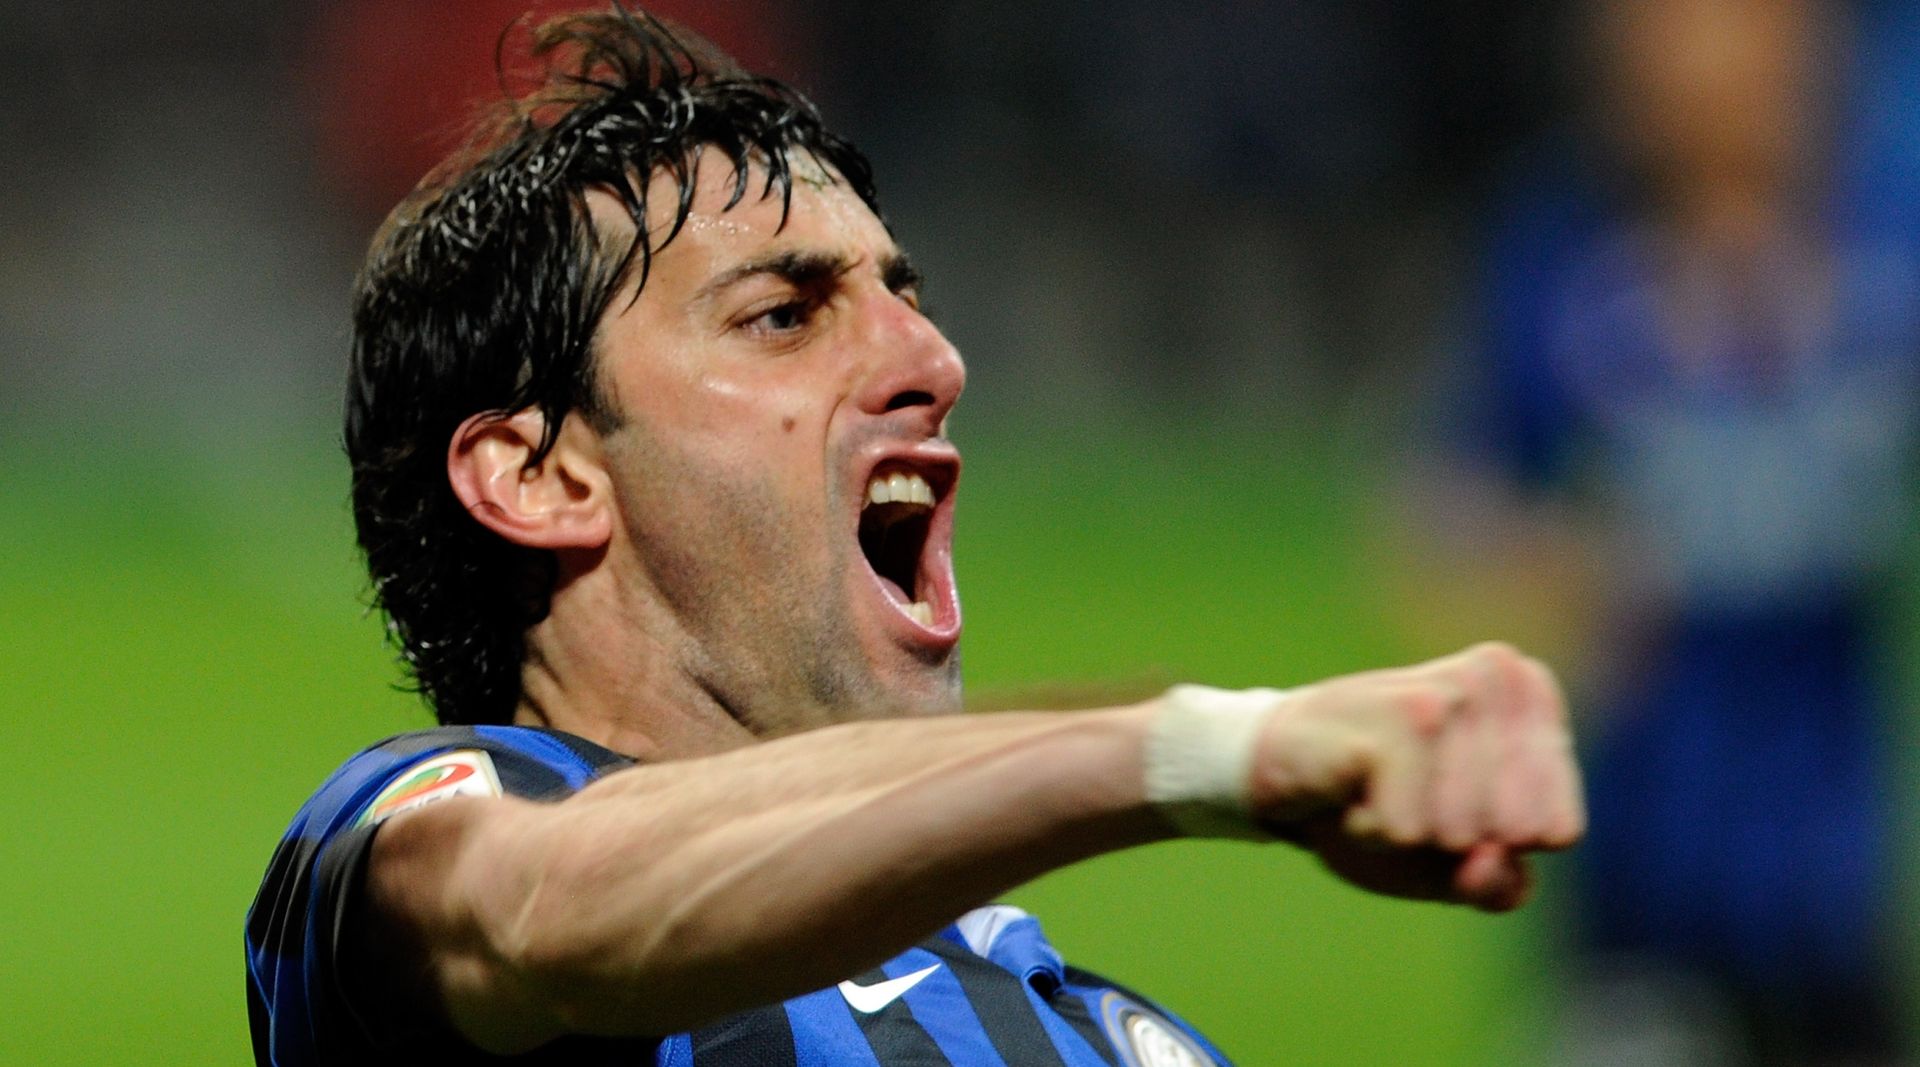 <p>                     Argentine striker Diego Milito joined Inter Milan from Genoa ahead of the 2009/10 season – and he made an instant impact, finding the net 24 times in Serie A and 30 times in all competitions as the Nerazzurri did the treble under Jose Mourinho.                   </p>                                      <p>                     The rest of his time at Inter was up-and-down, but he outdid himself with 24 league goals during the 2011/12 campaign.                   </p>